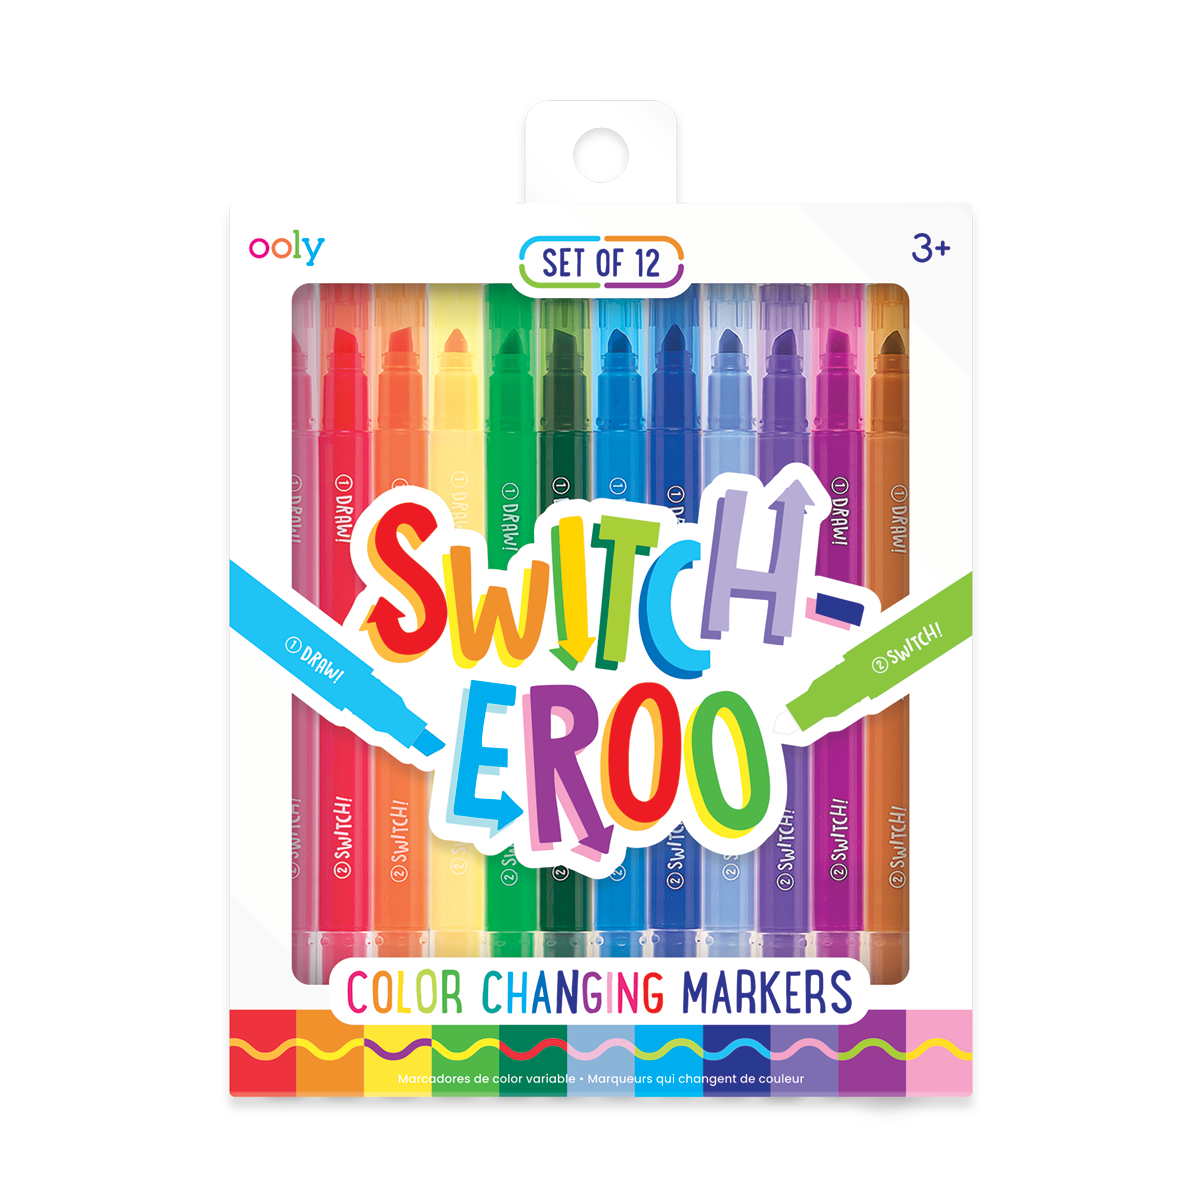 Switch-eroo! Color-Changing Markers – Nest Style & Design